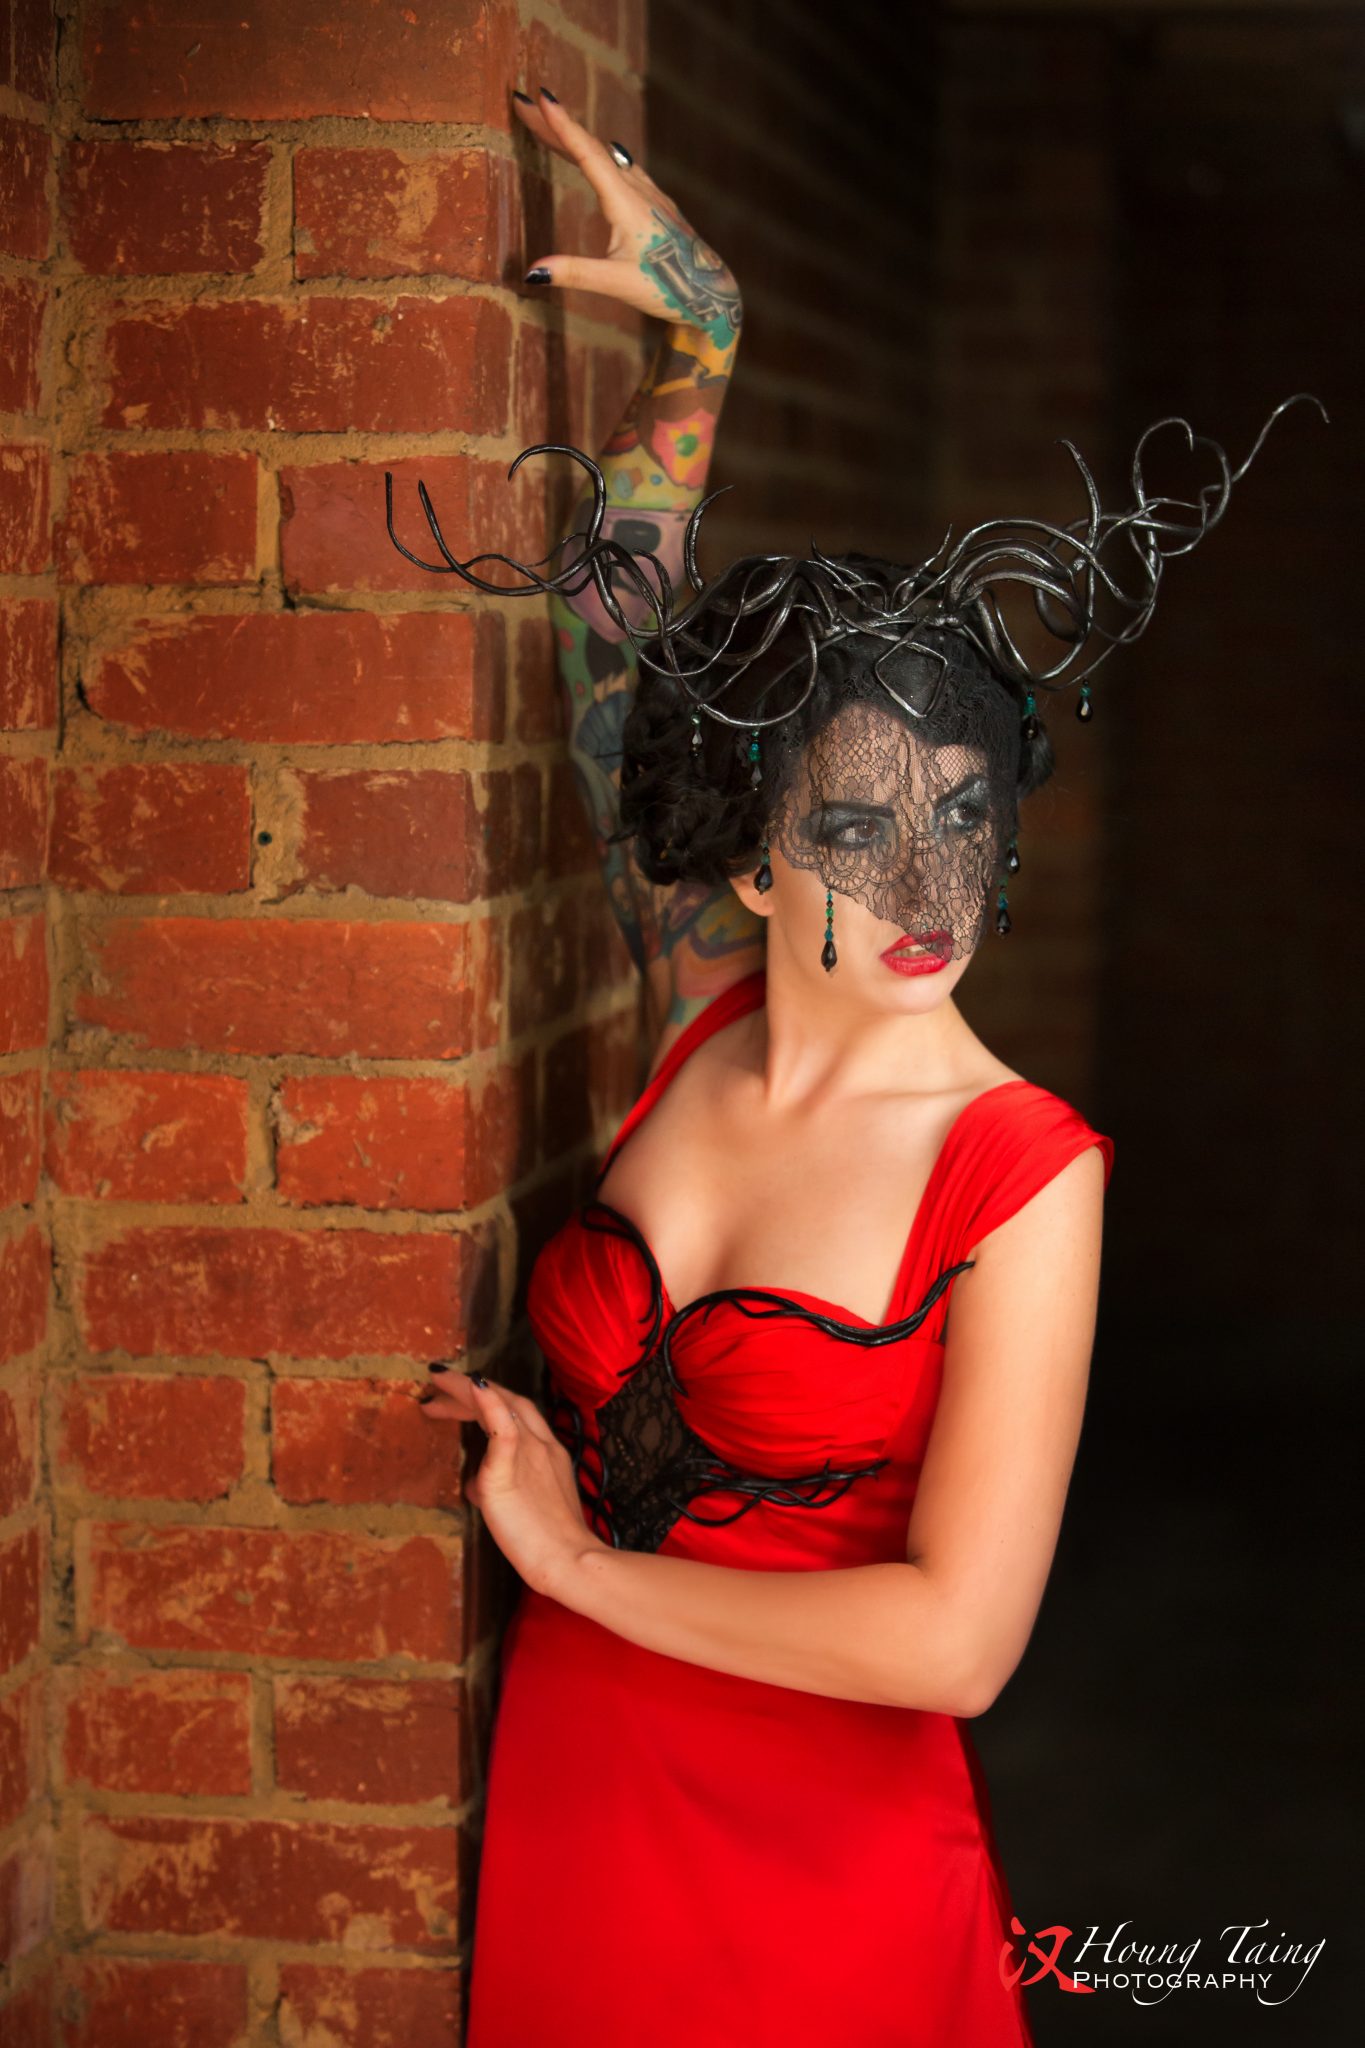 Arien, layered red gown, with twisted black horns with crytals and a black lace veil.